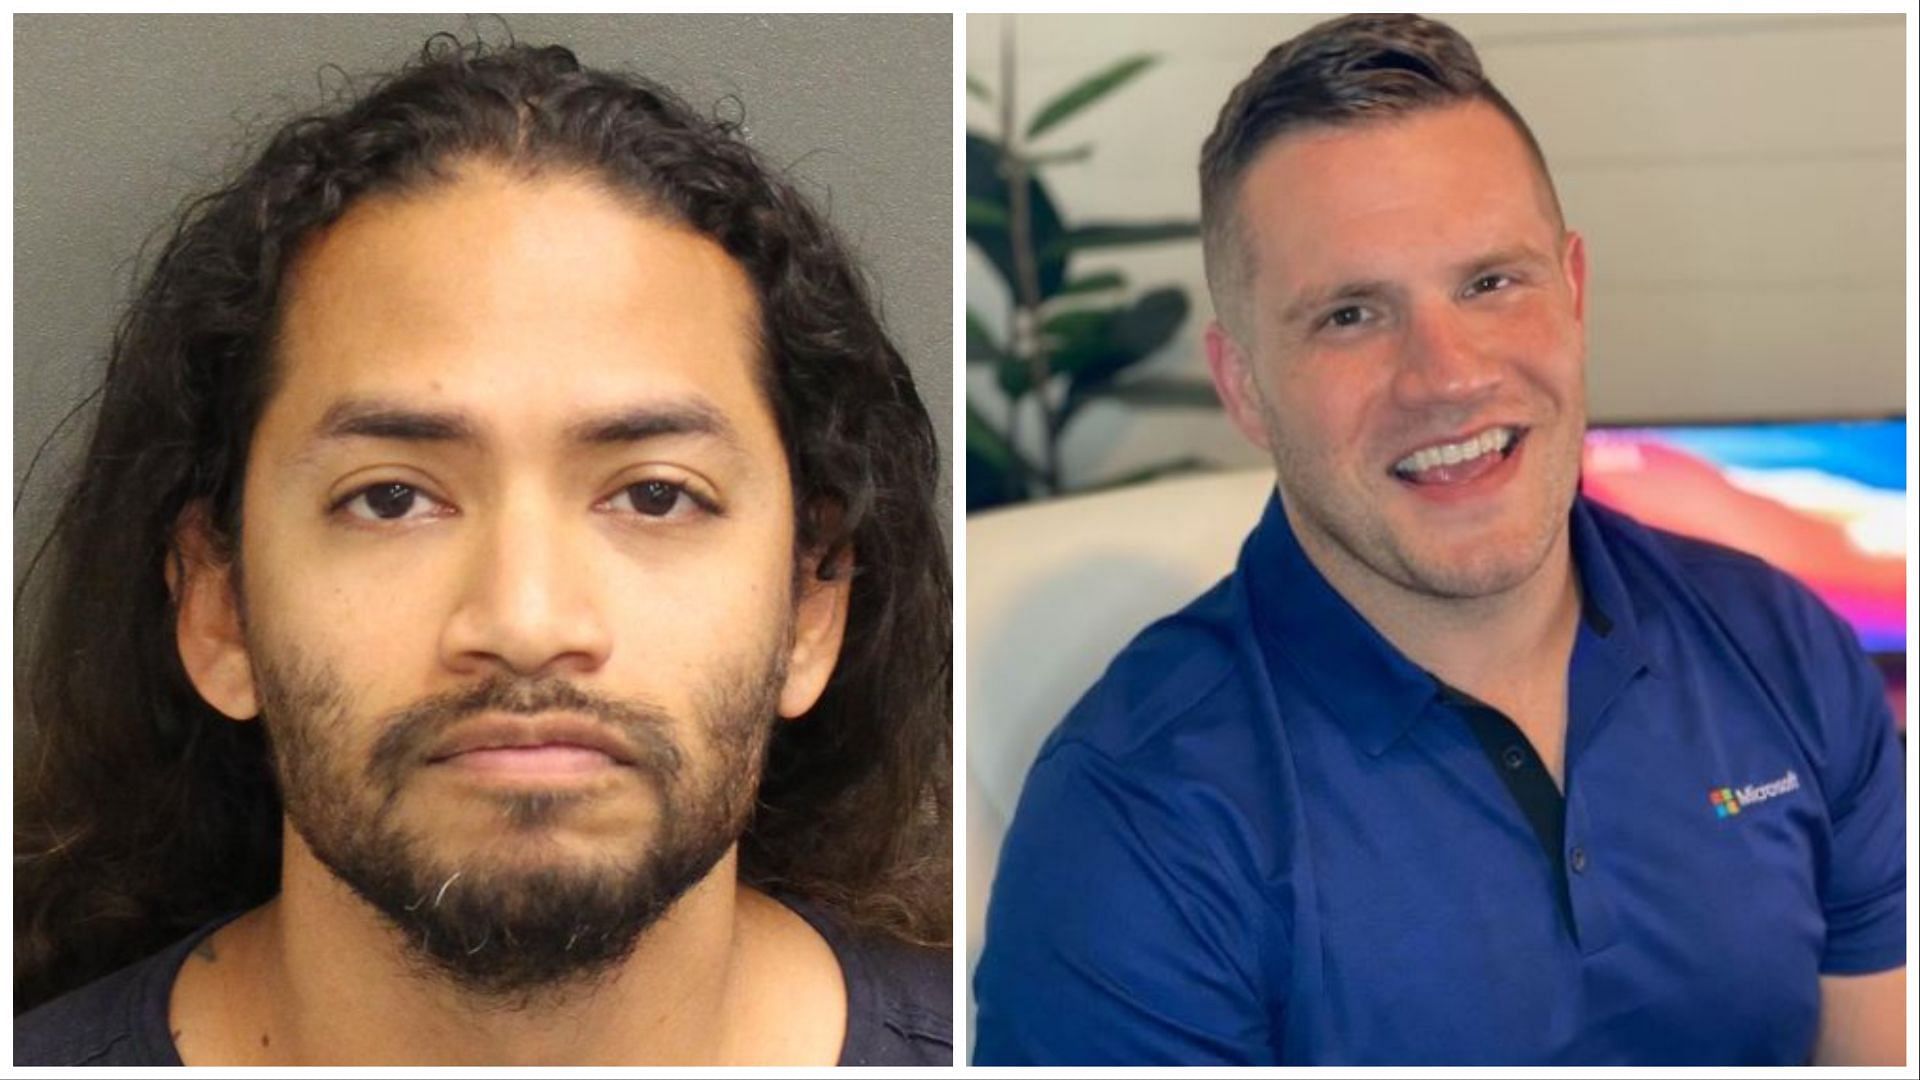 Mario Fernandez Saldana (left) was arrested and charged with first-degree murder of Jared Bridegan (right), (Images via Ｎｅｒｄｙ 🅰🅳🅳🅸🅲🆃 and @BrianEntin/Twitter)